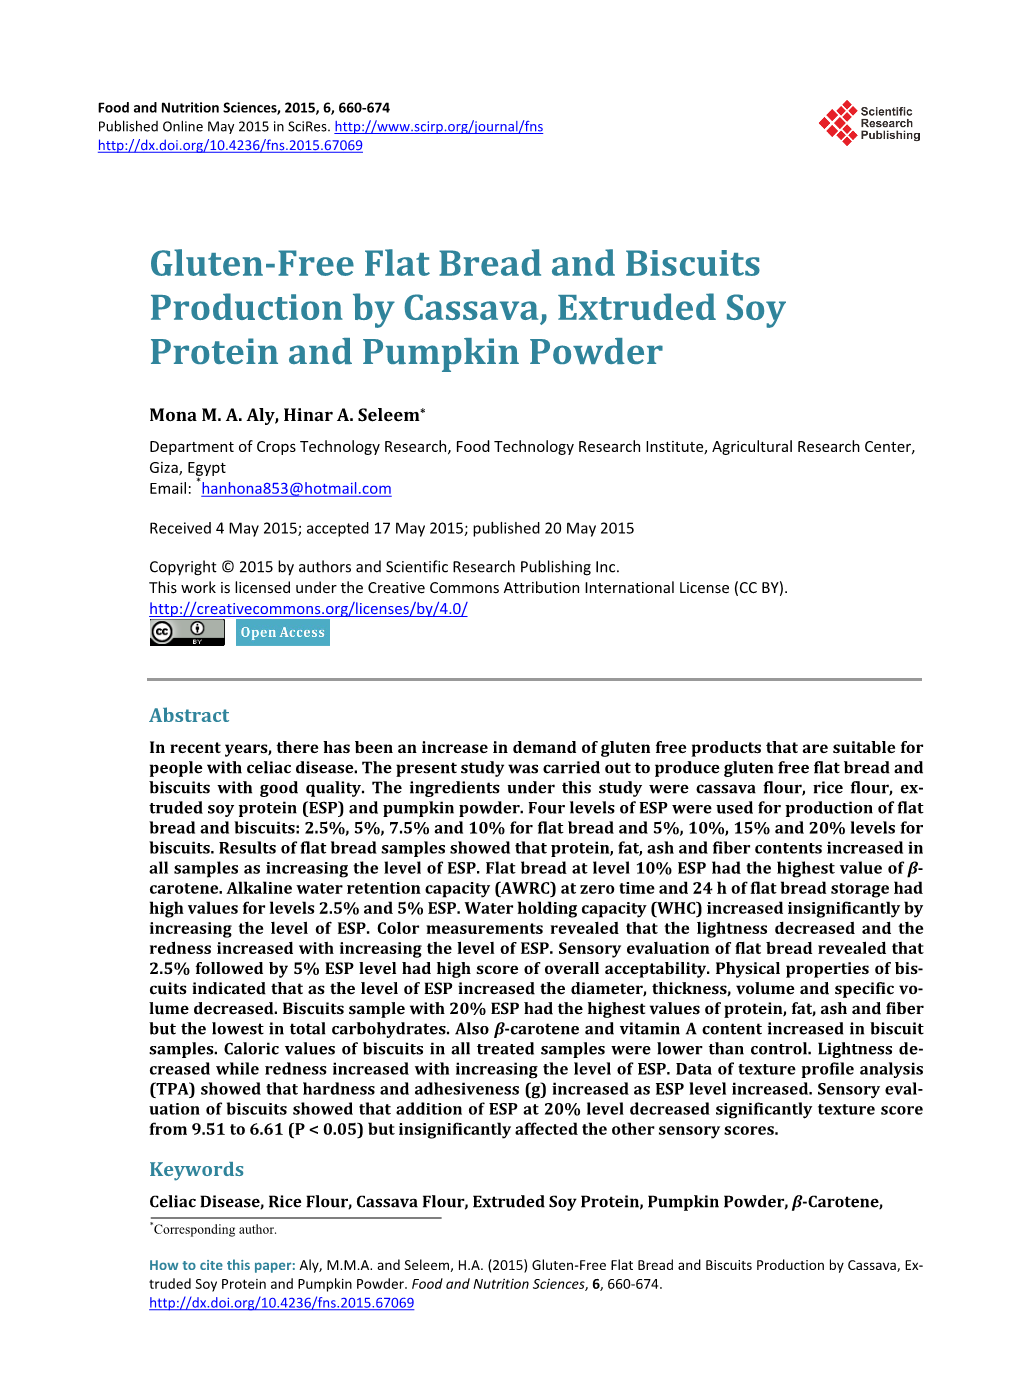 Gluten-Free Flat Bread and Biscuits Production by Cassava, Extruded Soy Protein and Pumpkin Powder